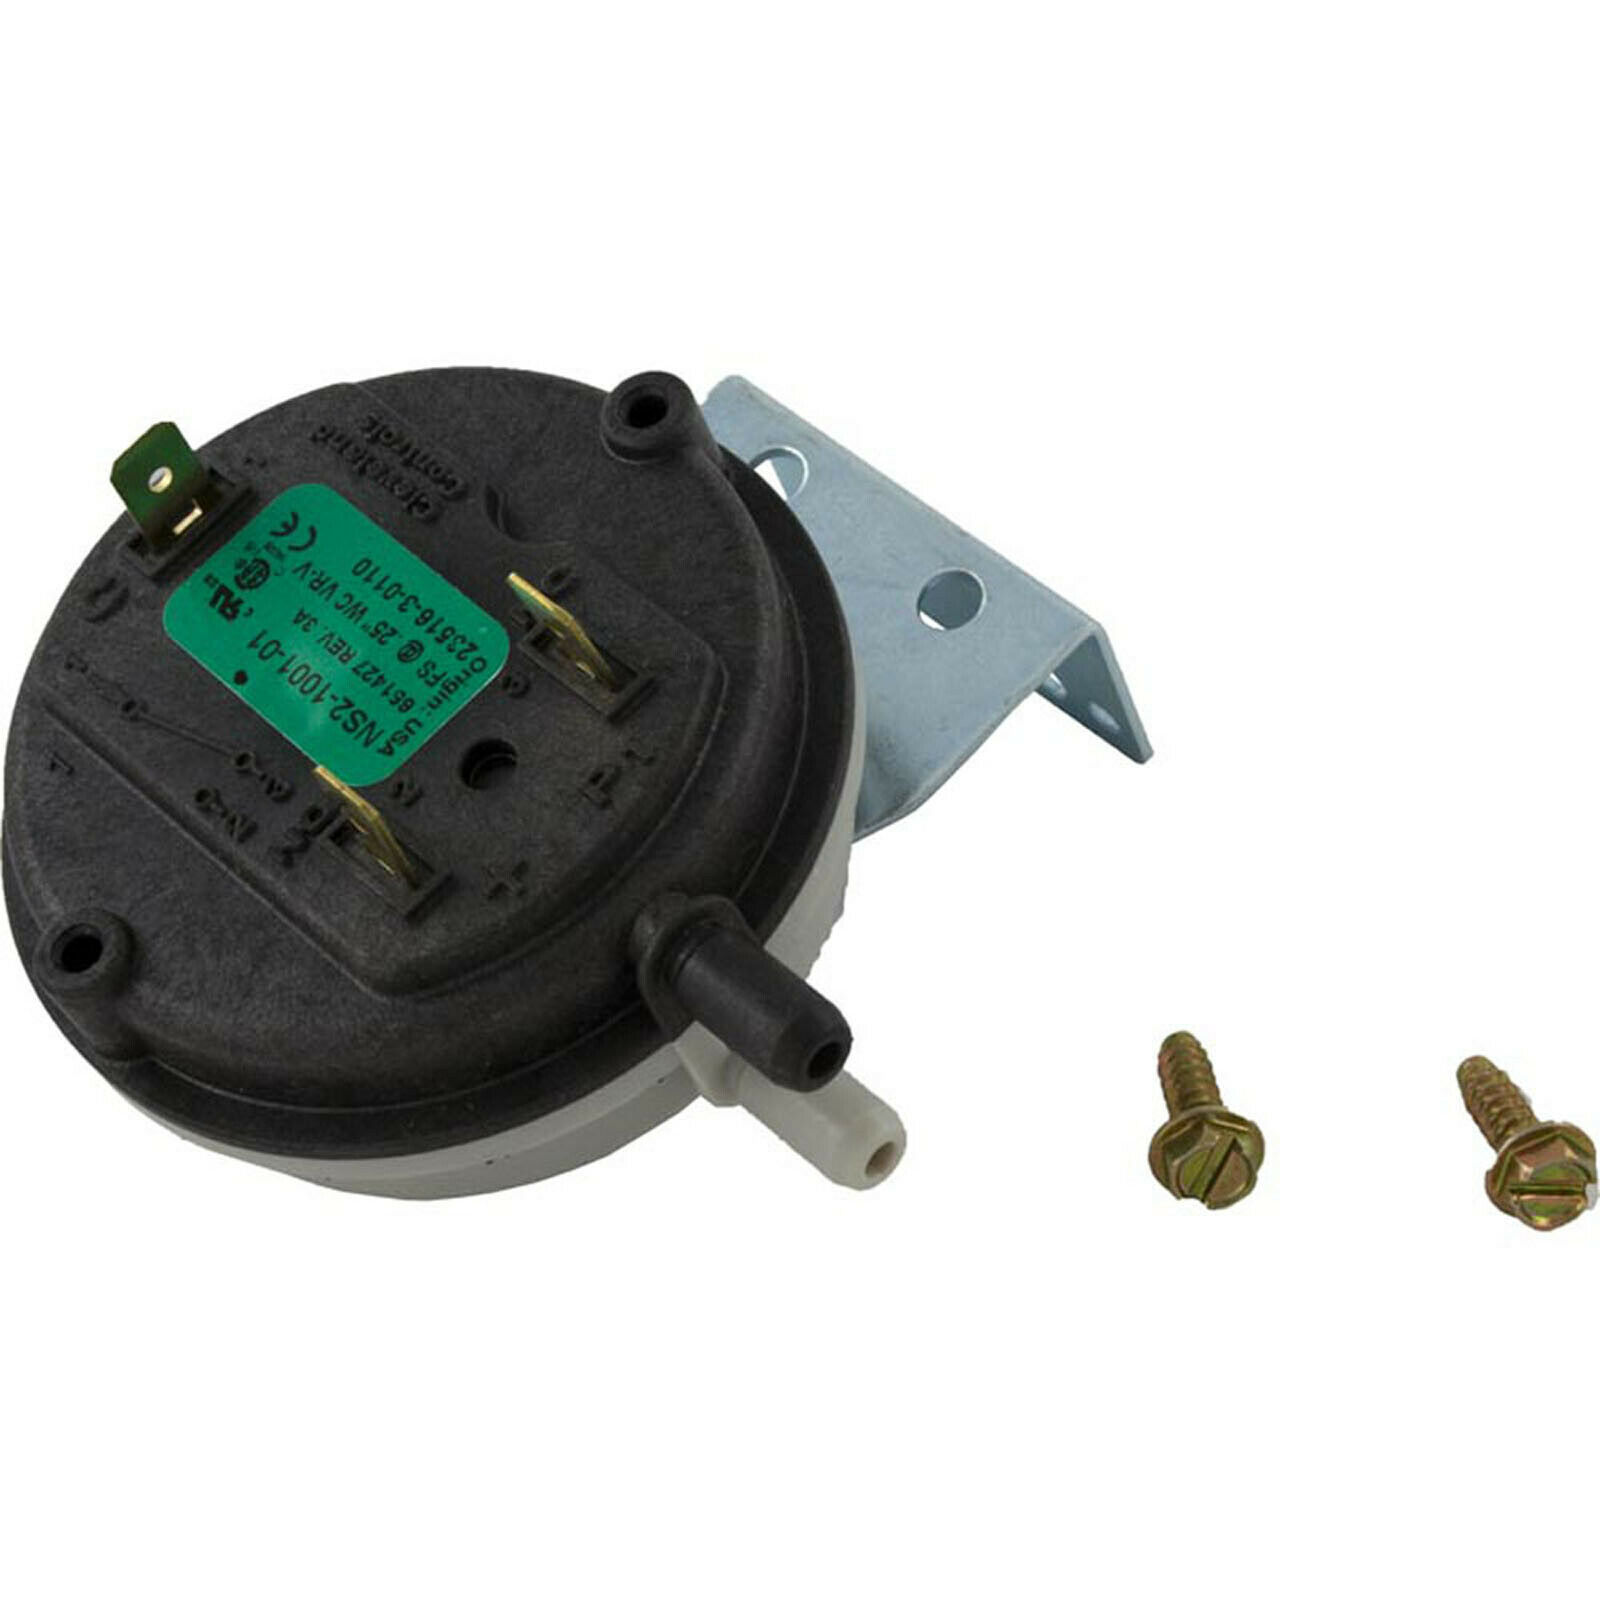 Primary image for Raypak NS2-1001-01 Air Pressure Switch for Raypak 407A Digital Low Nox Heater